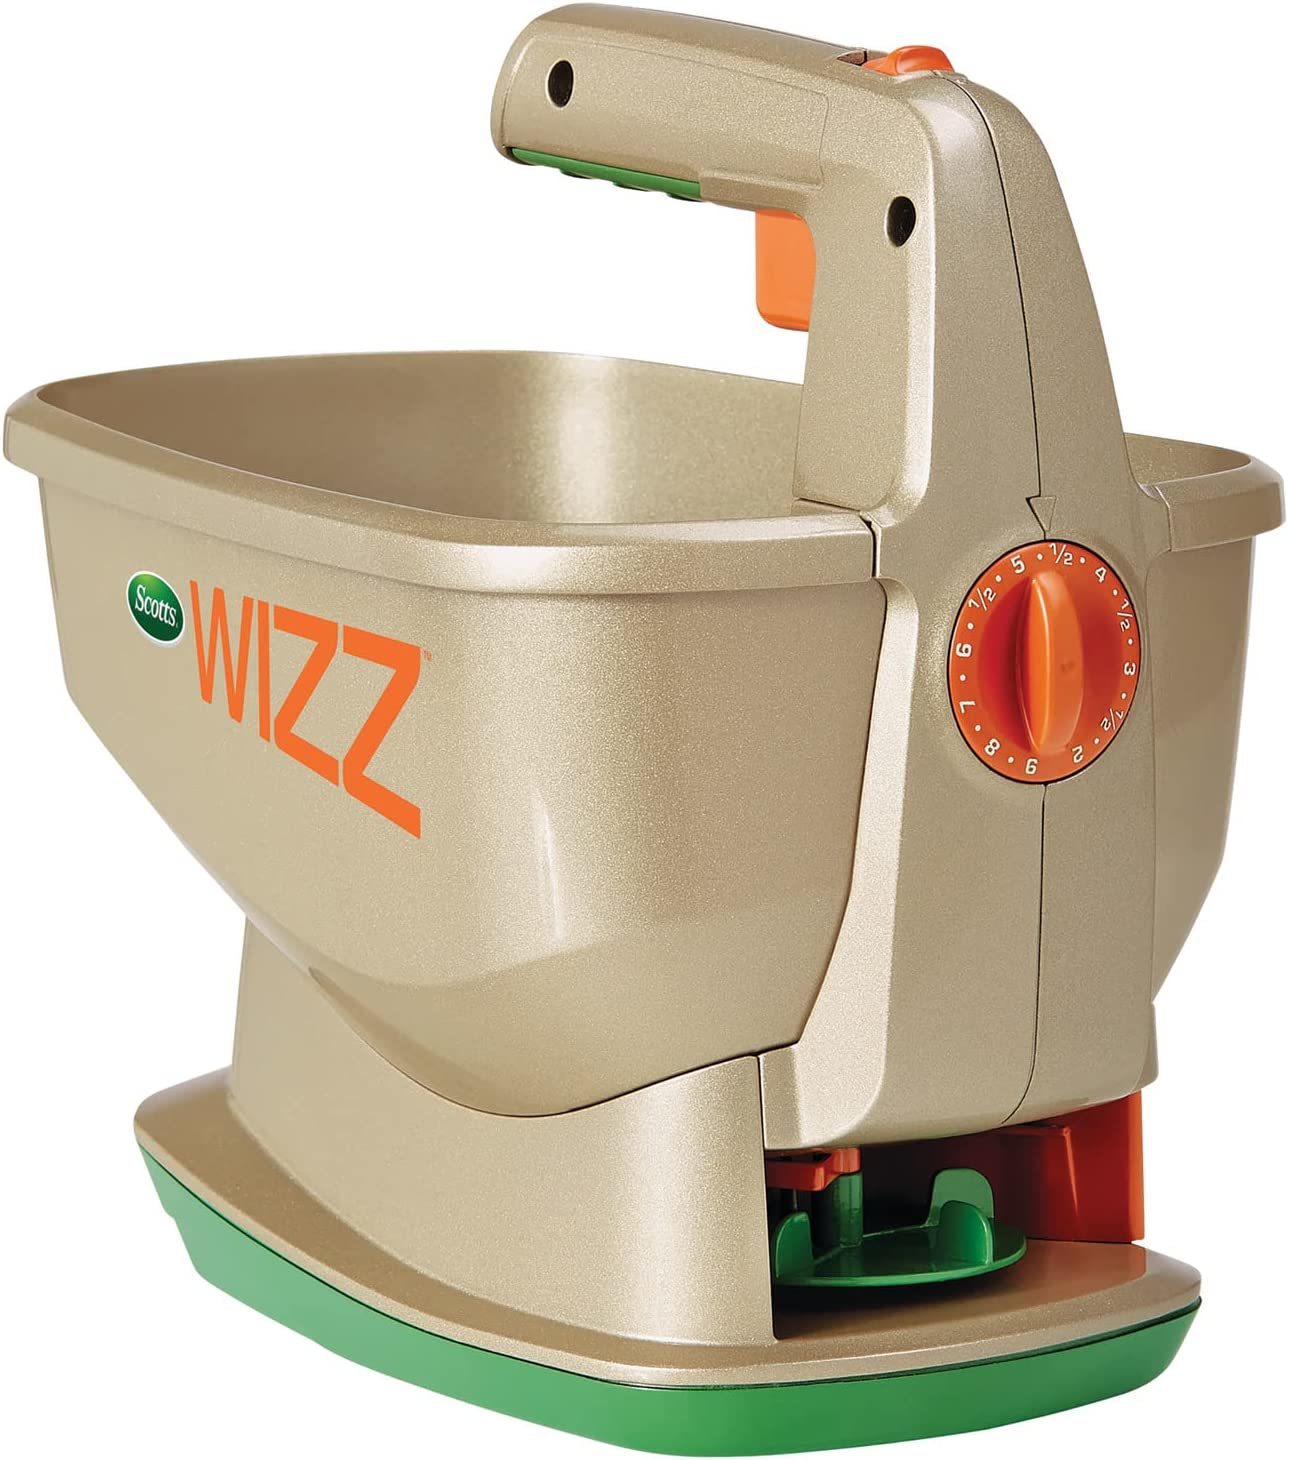 Use Scotts Wizz Spreader, A Portable Power Spreader That Can Cover Up To, Round. - $38.94